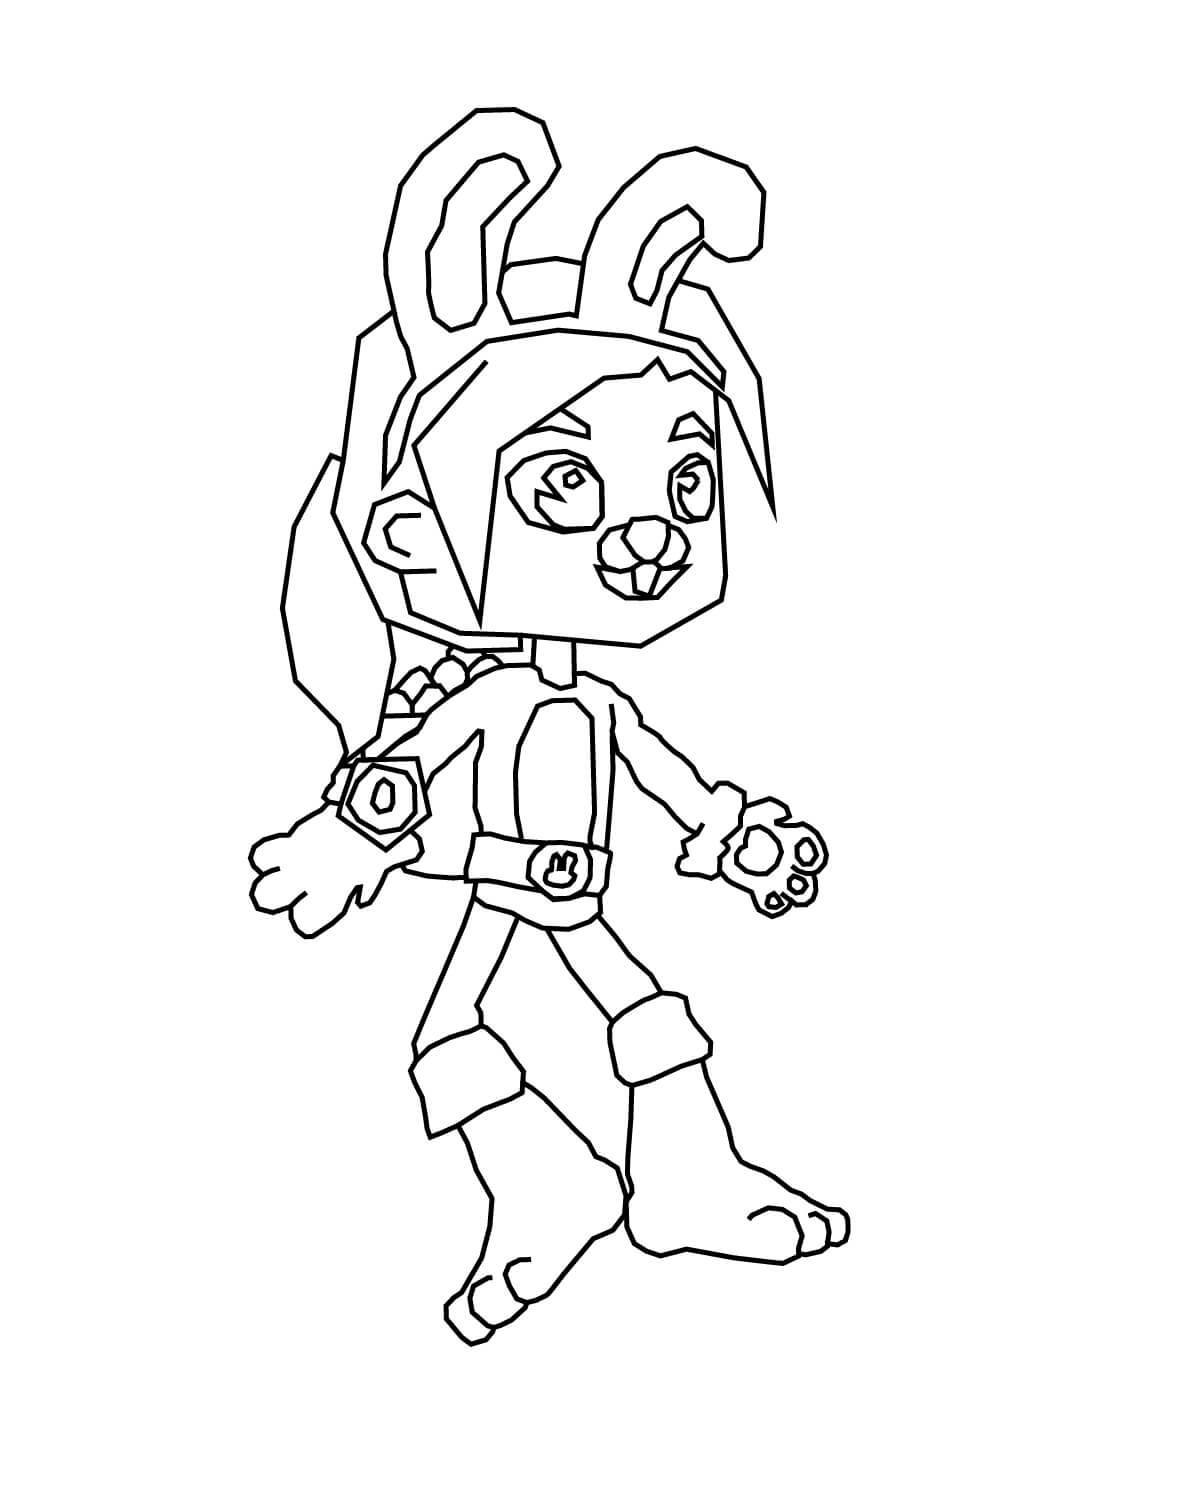 Lapin_Coloriage_4